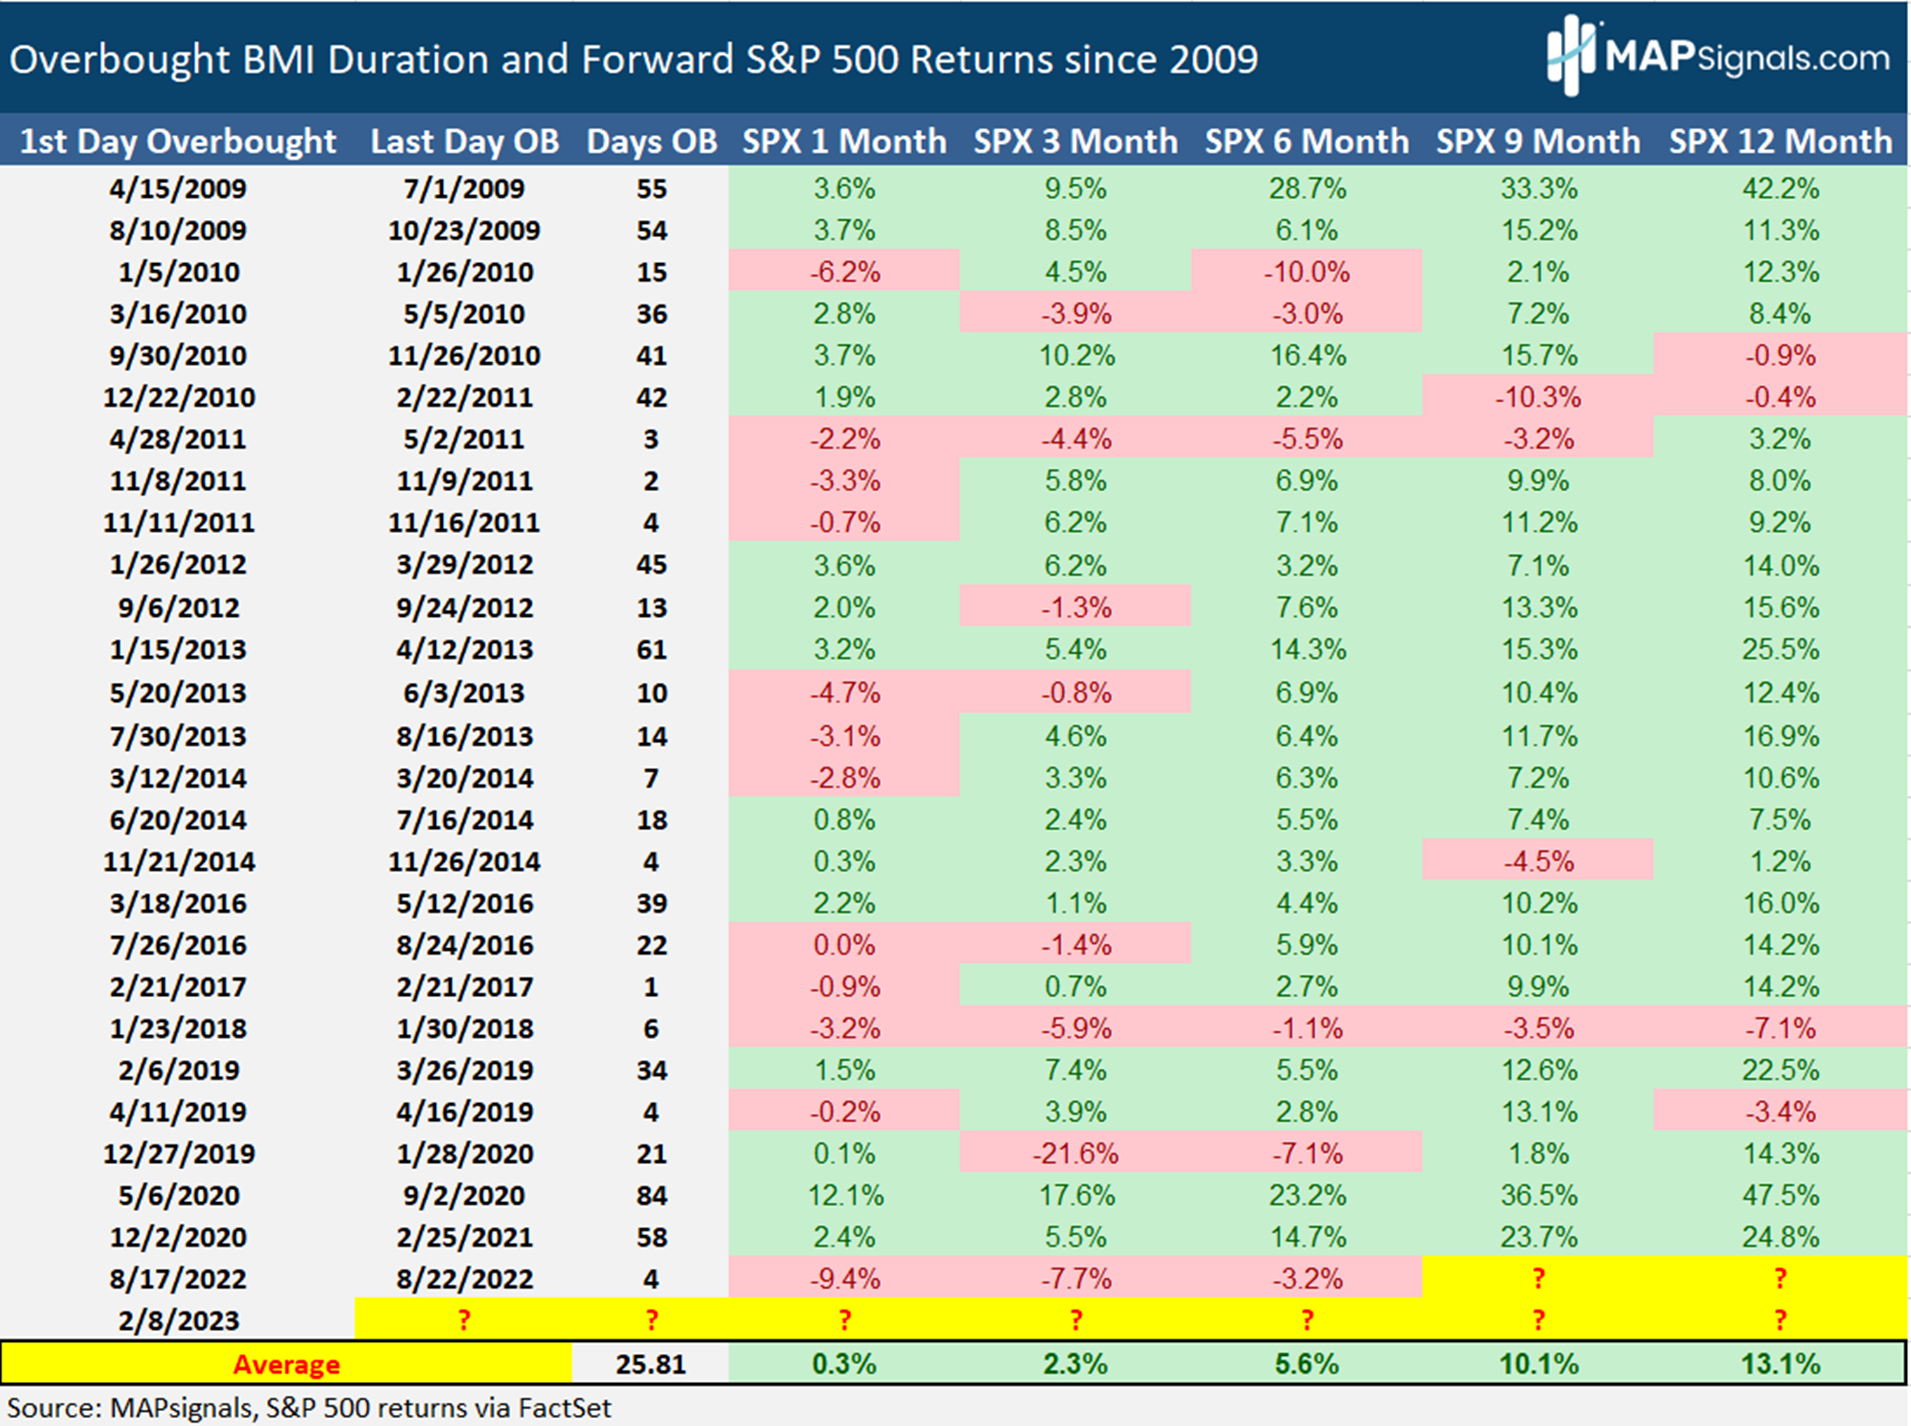 Overbought BMI Duration Forward S&P 500 Returns since 2009 | MAPsignals